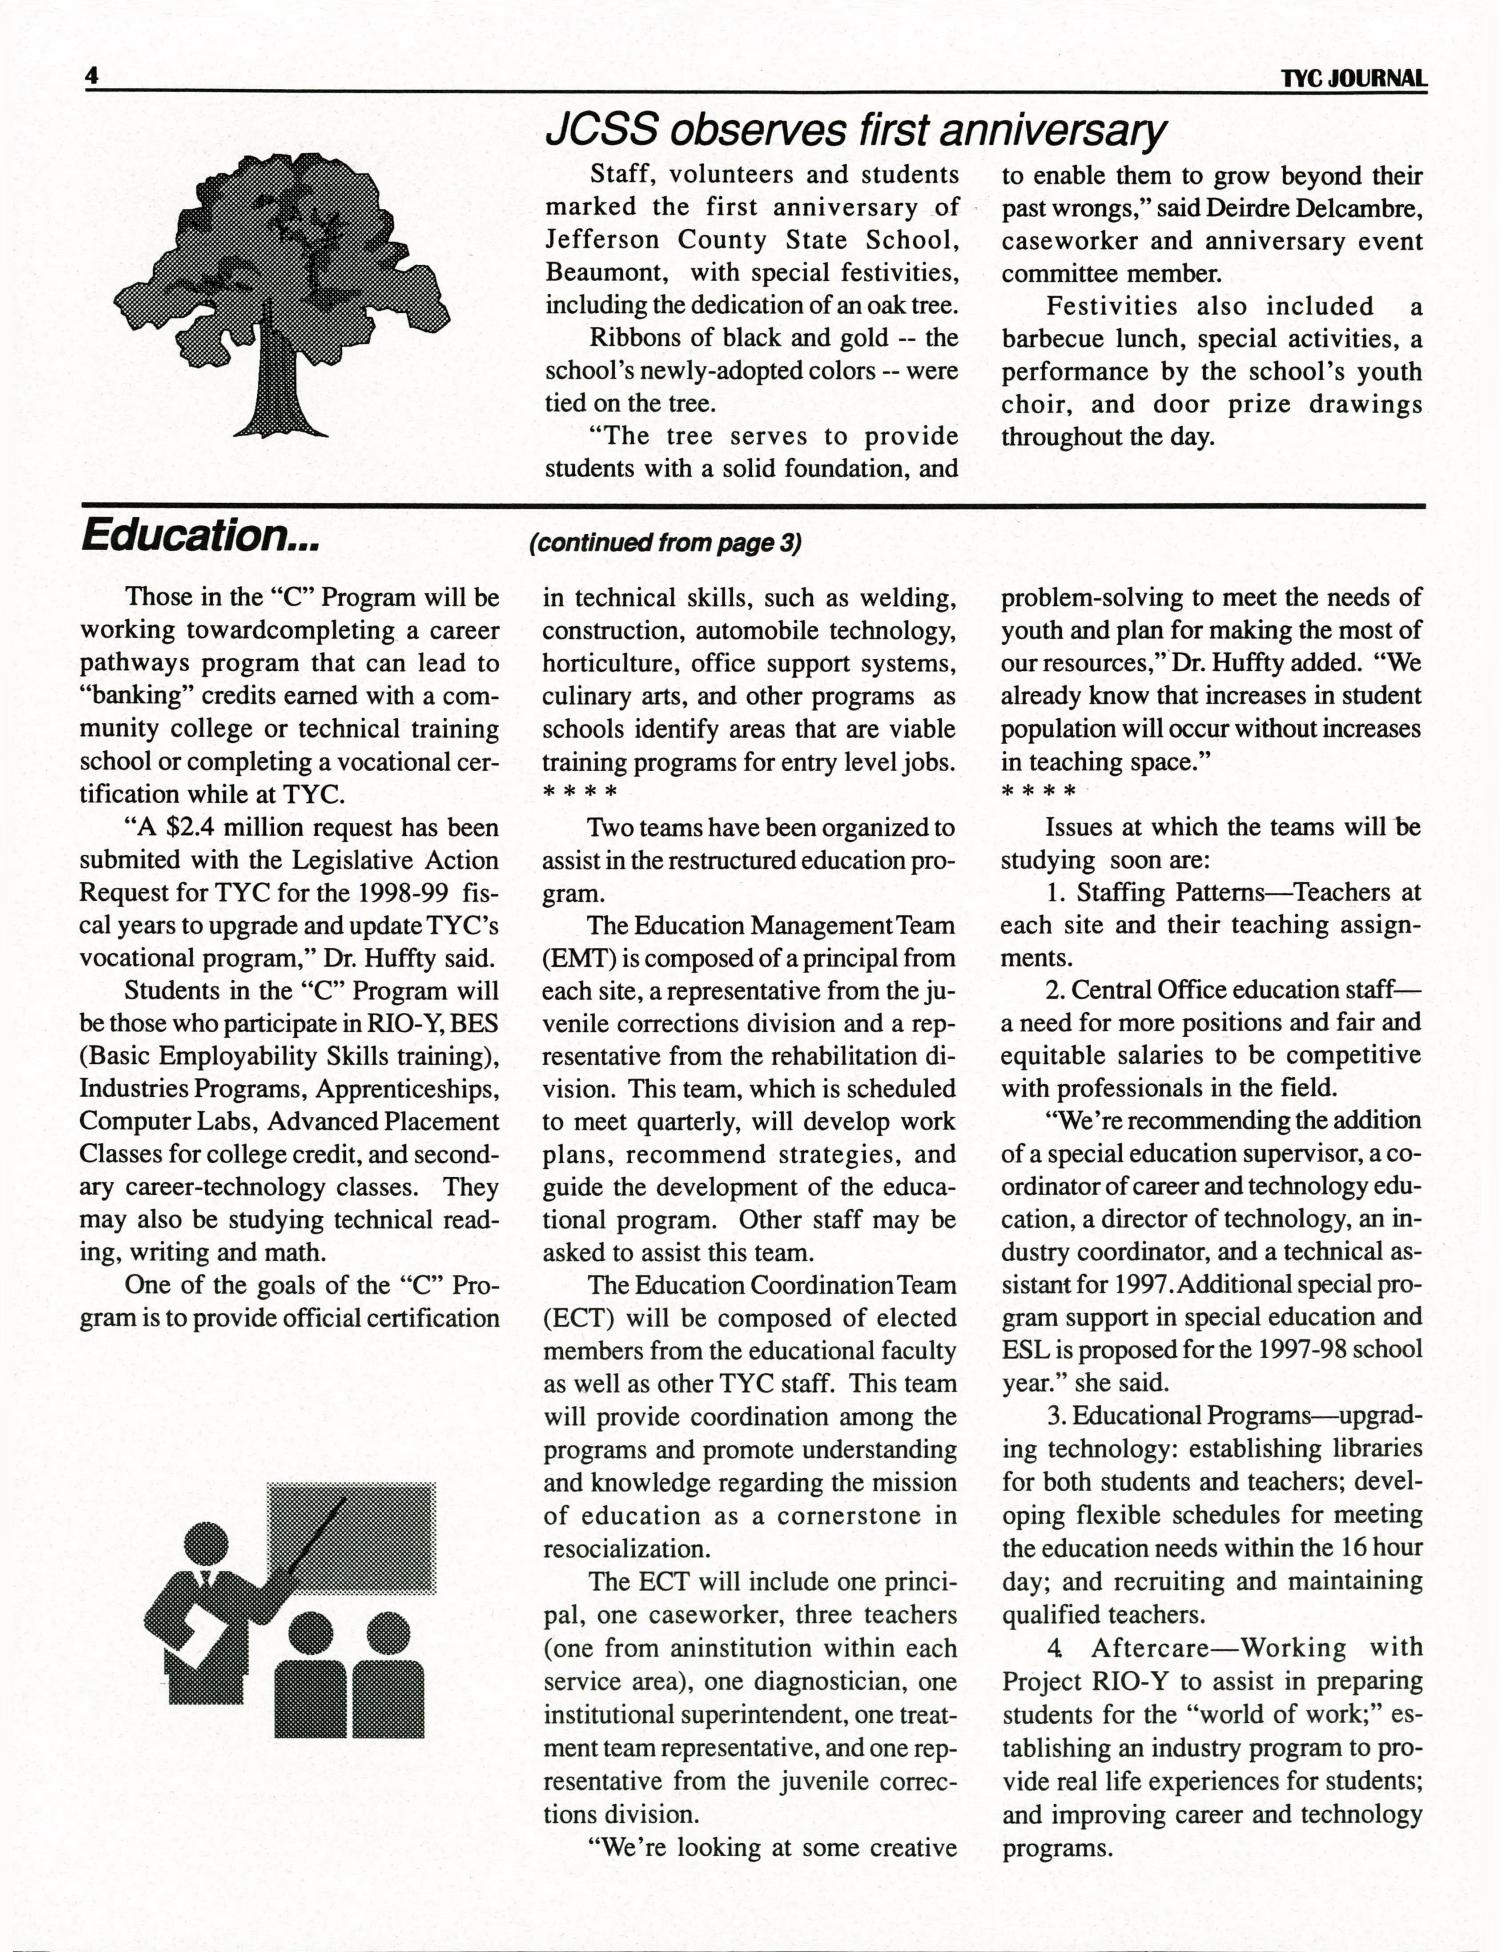 Texas Youth Commission Journal, December 1996
                                                
                                                    4
                                                